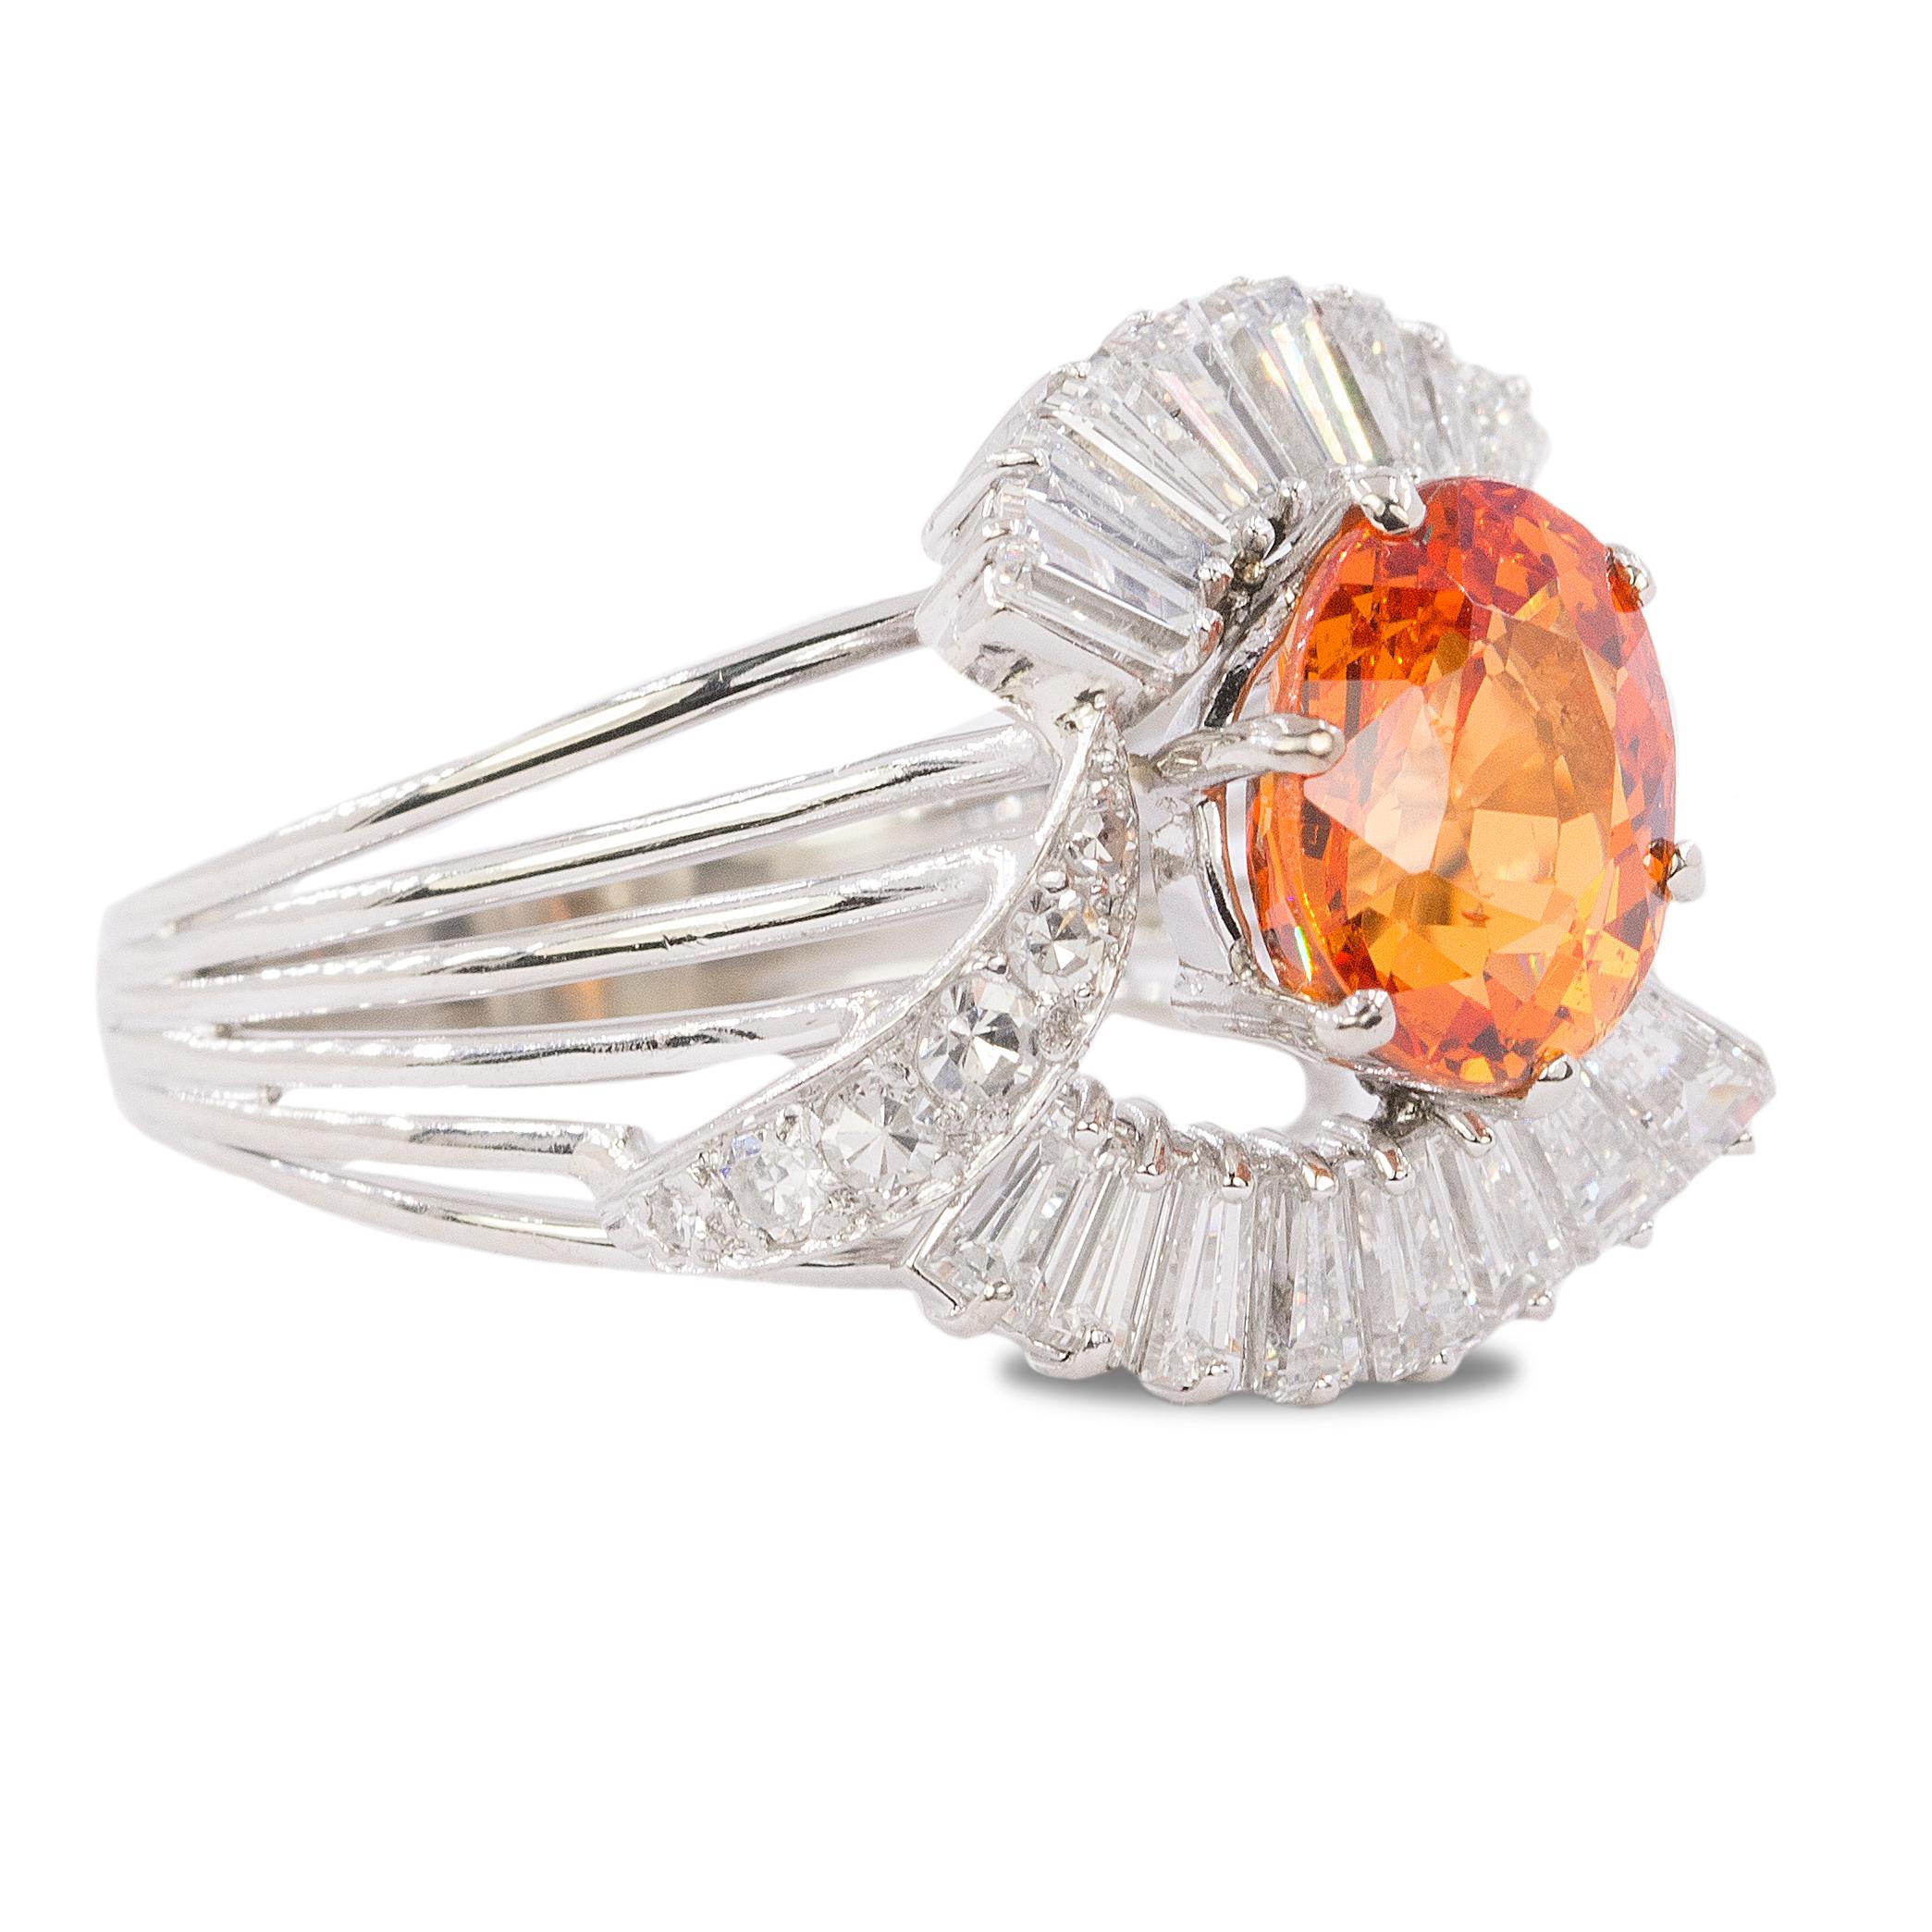 18k white gold ring with a 4.05 carat Spessartite Garnet and 16 tapered baguette and 12 round diamonds weighing approximately 1.30 carats.